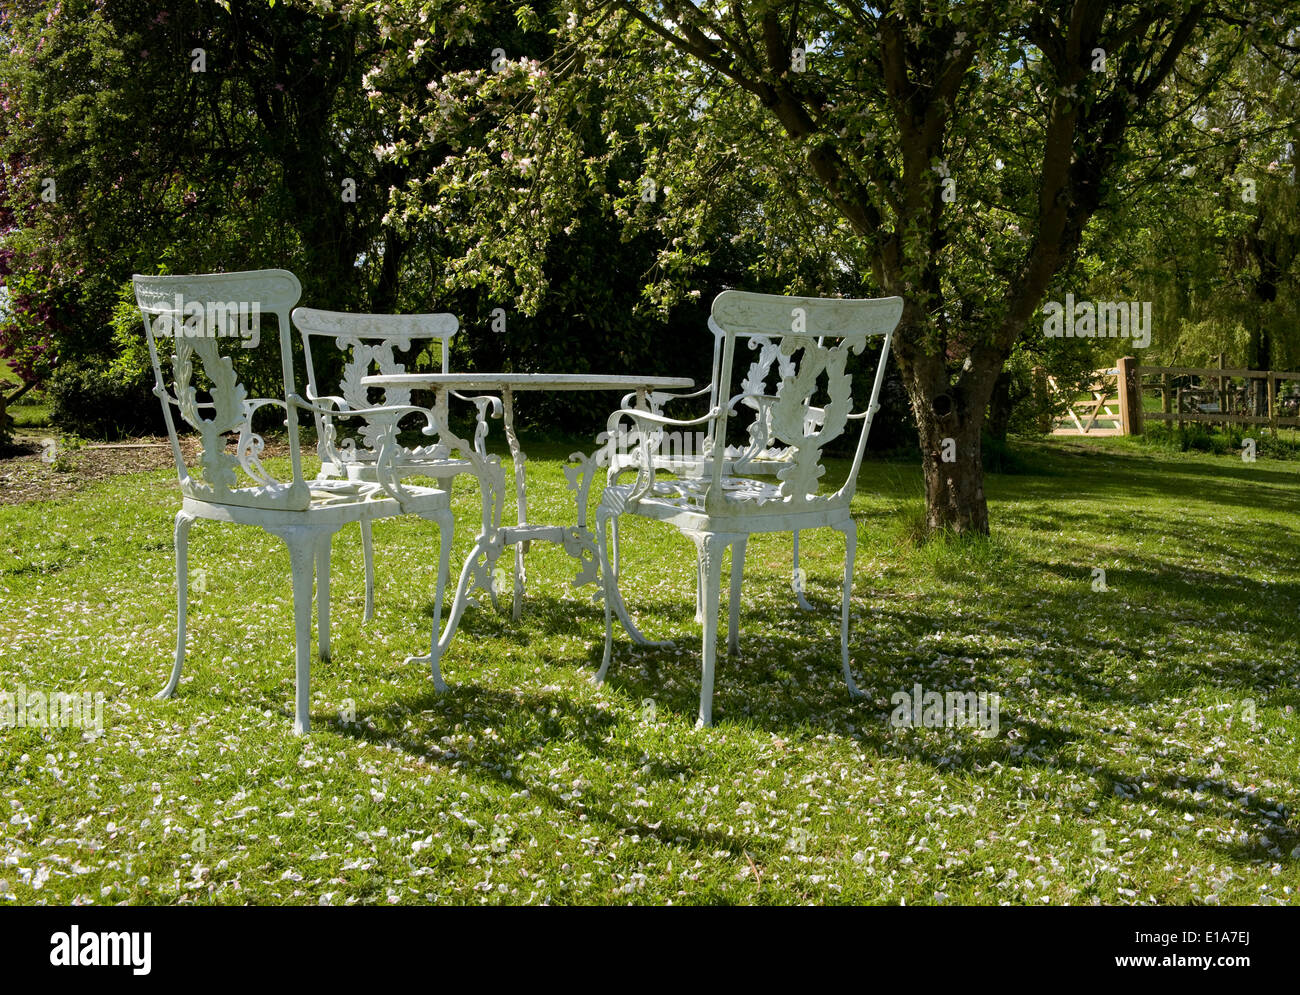 Fallen apple blossom petals on the grass around a garden table and chairs Stock Photo